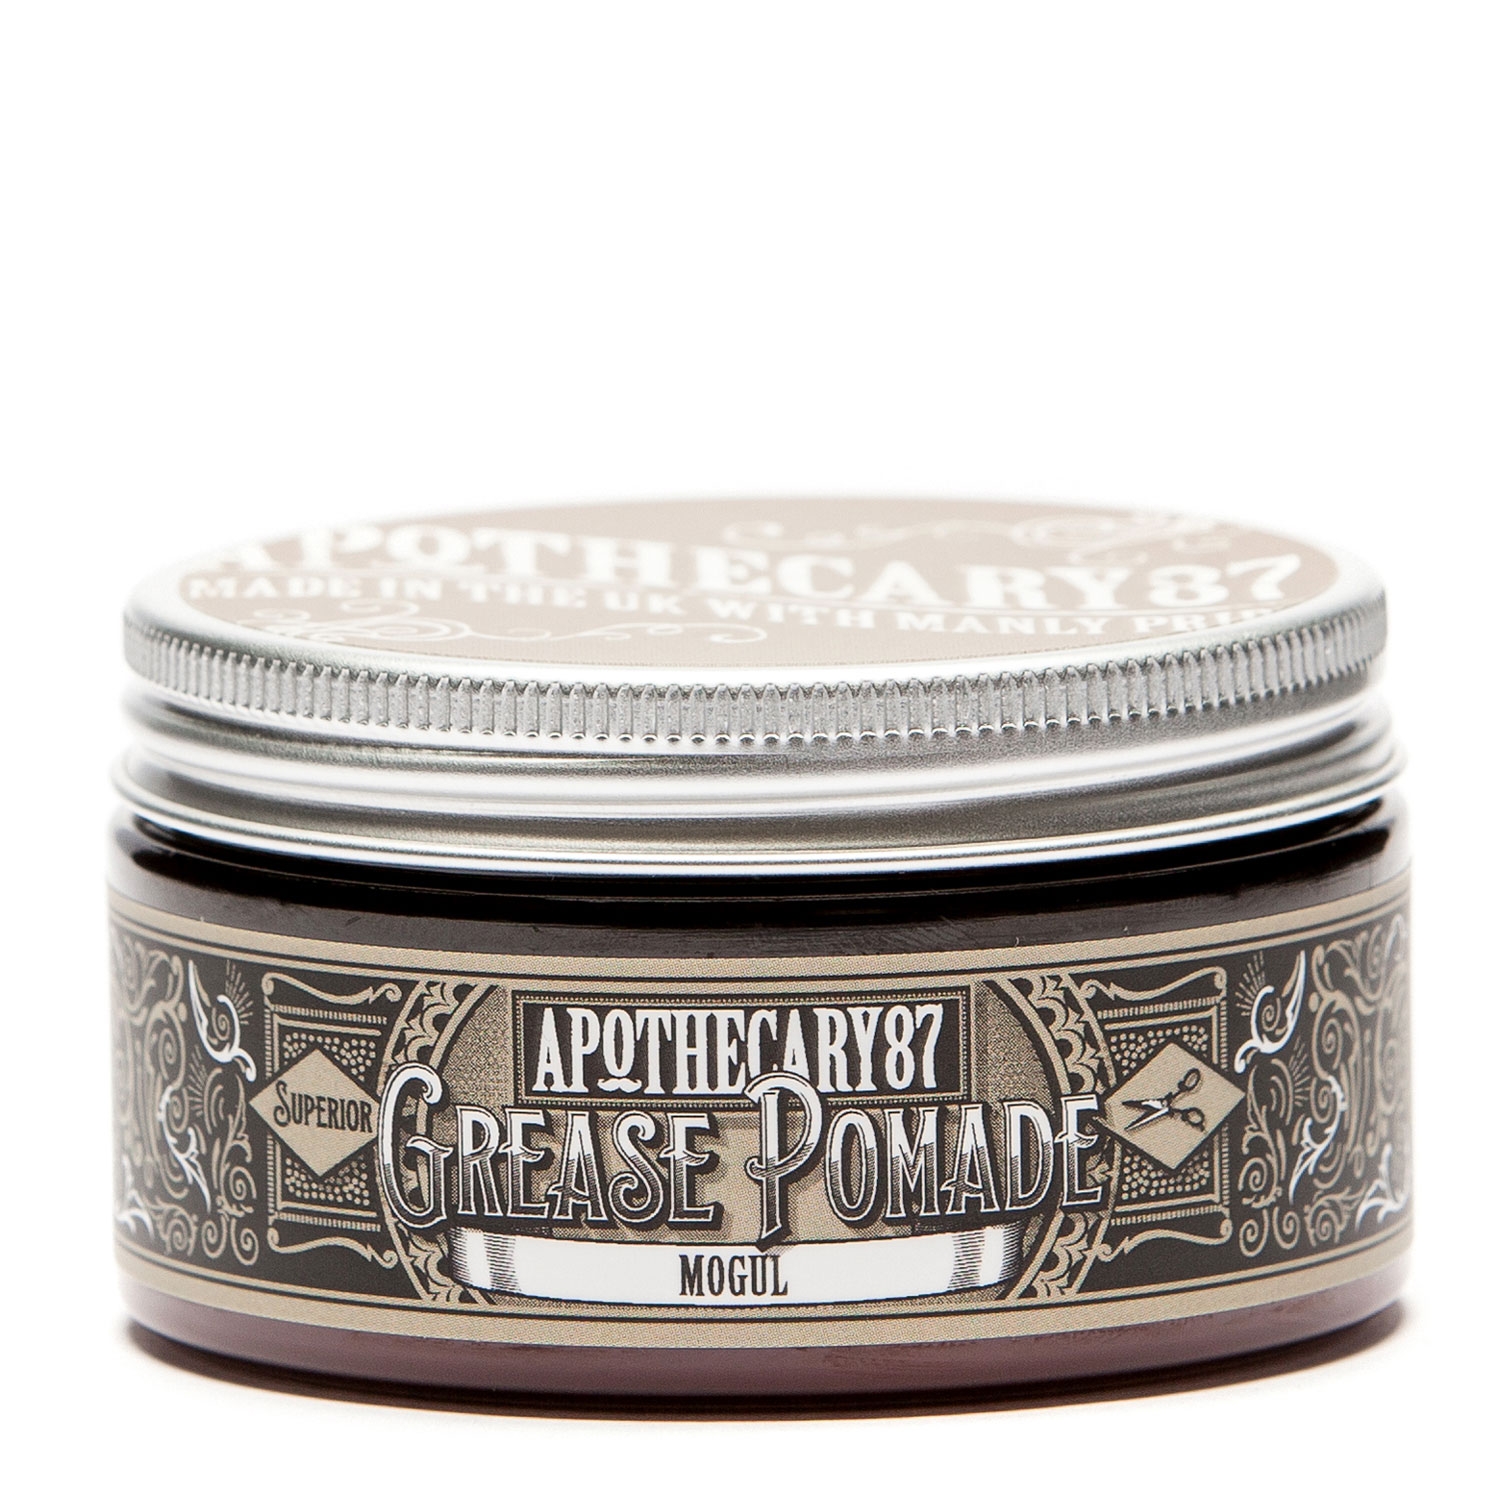 Produktbild von Apothecary87 Grooming - Grease Pomade Mogul Fragrance